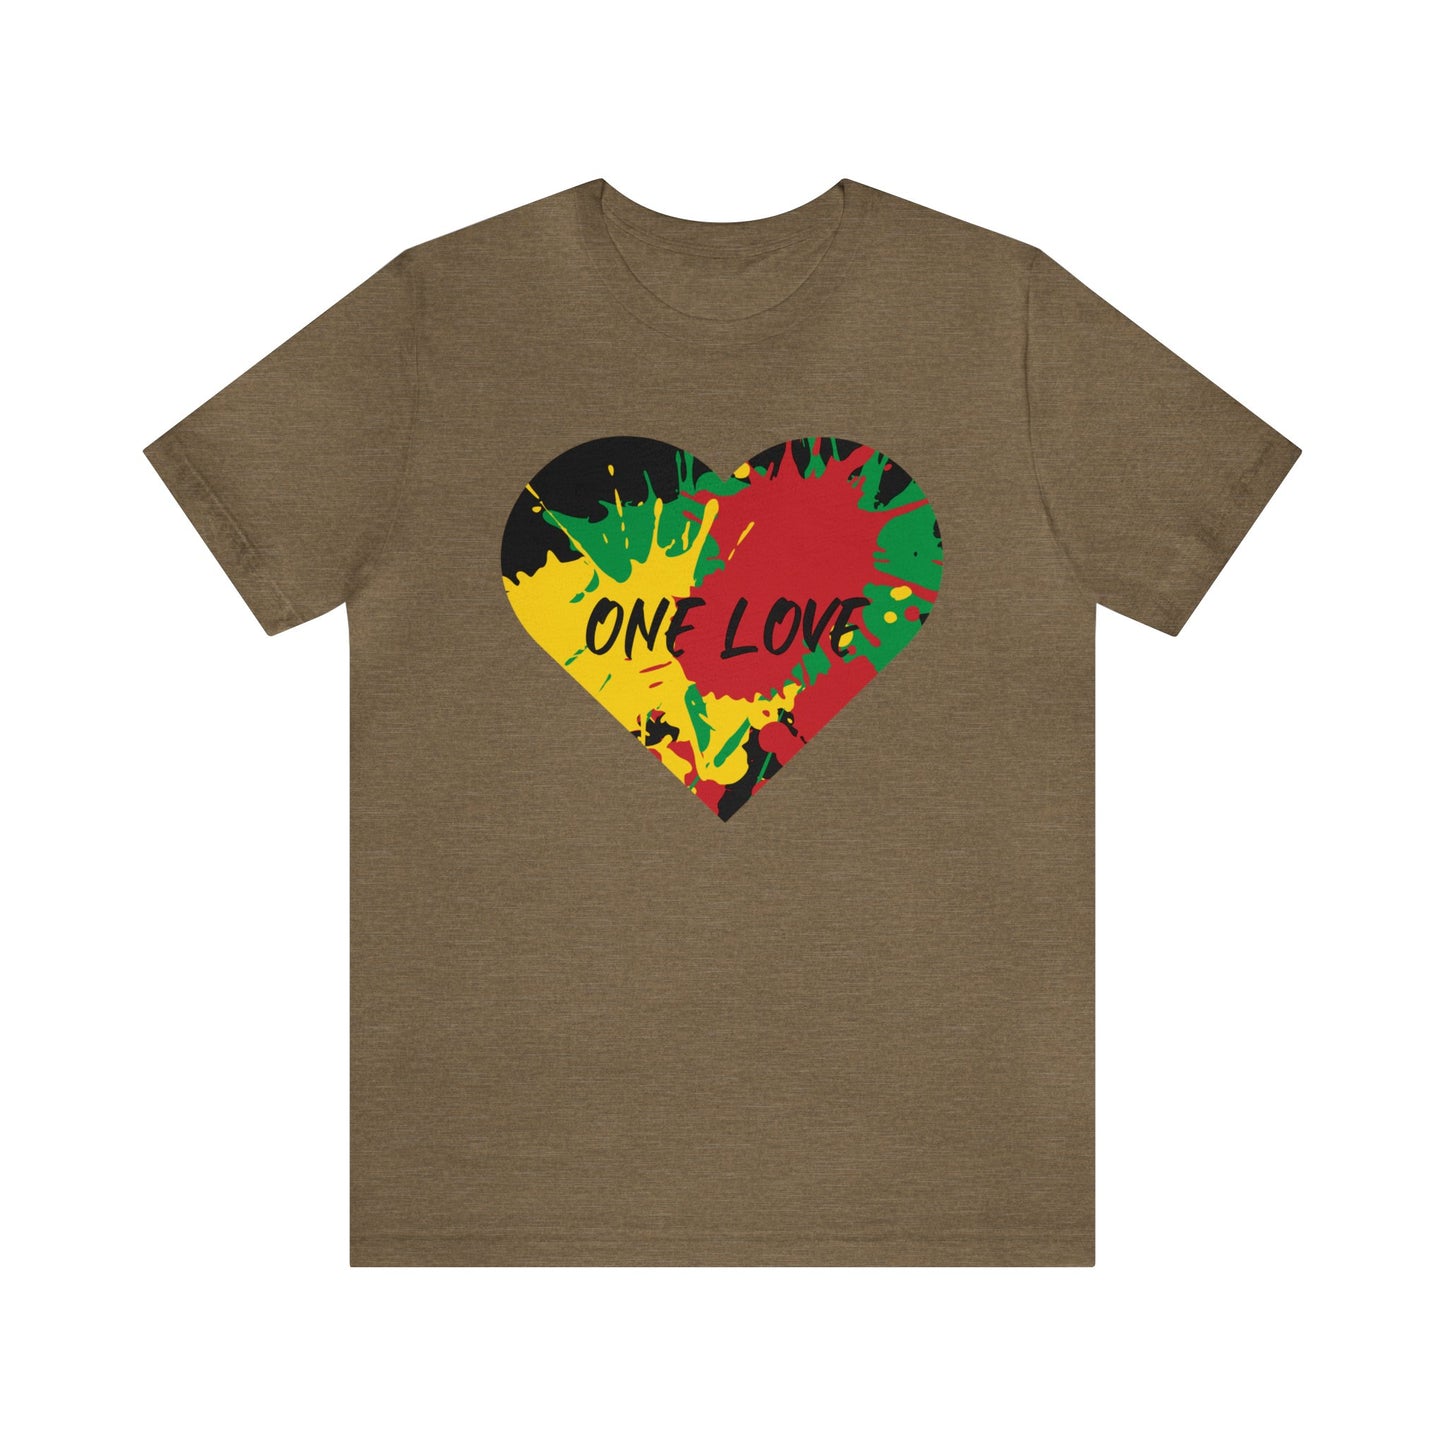 ONE LOVE GRAPHIC ROOTS ART DESIGN TEE SHIRT